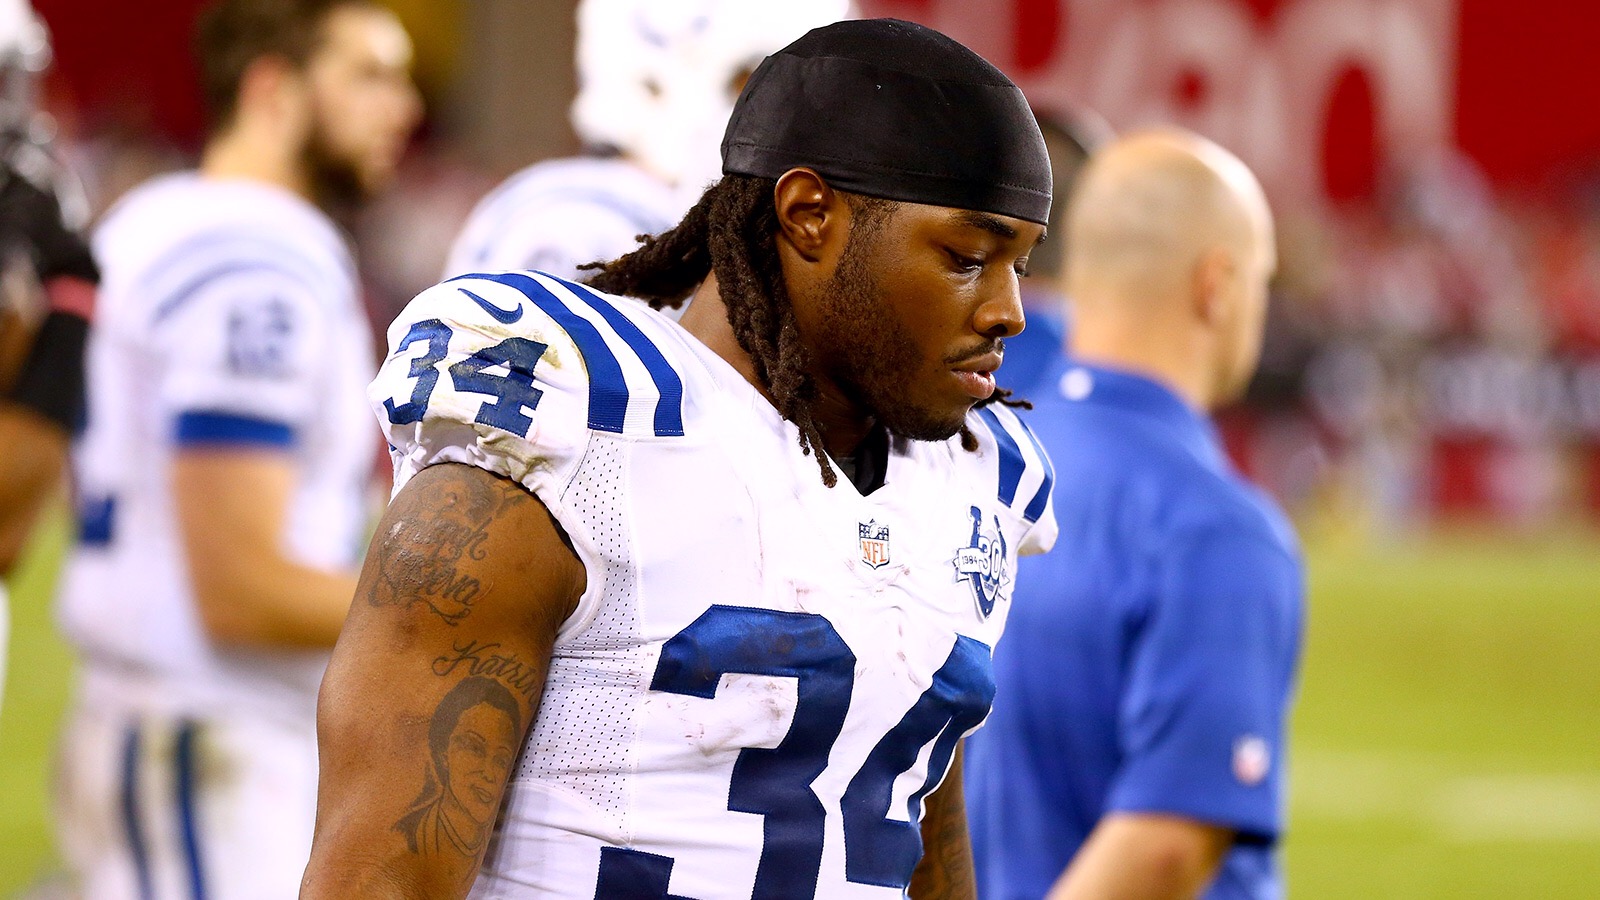 Illness may keep Trent Richardson out for playoffs